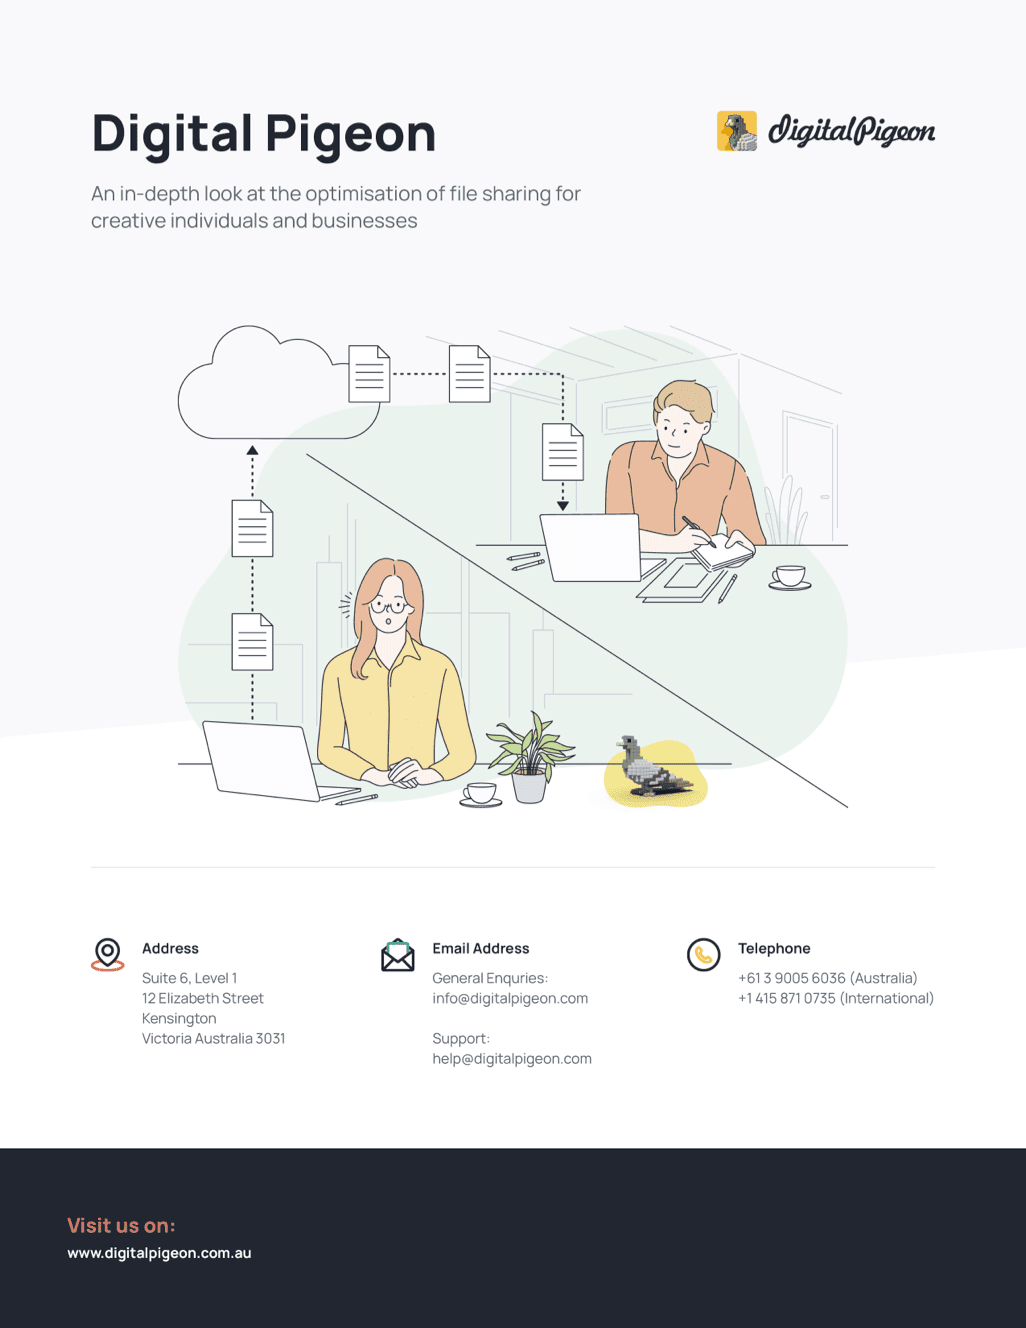 Digital Pigeon White Paper - Cover